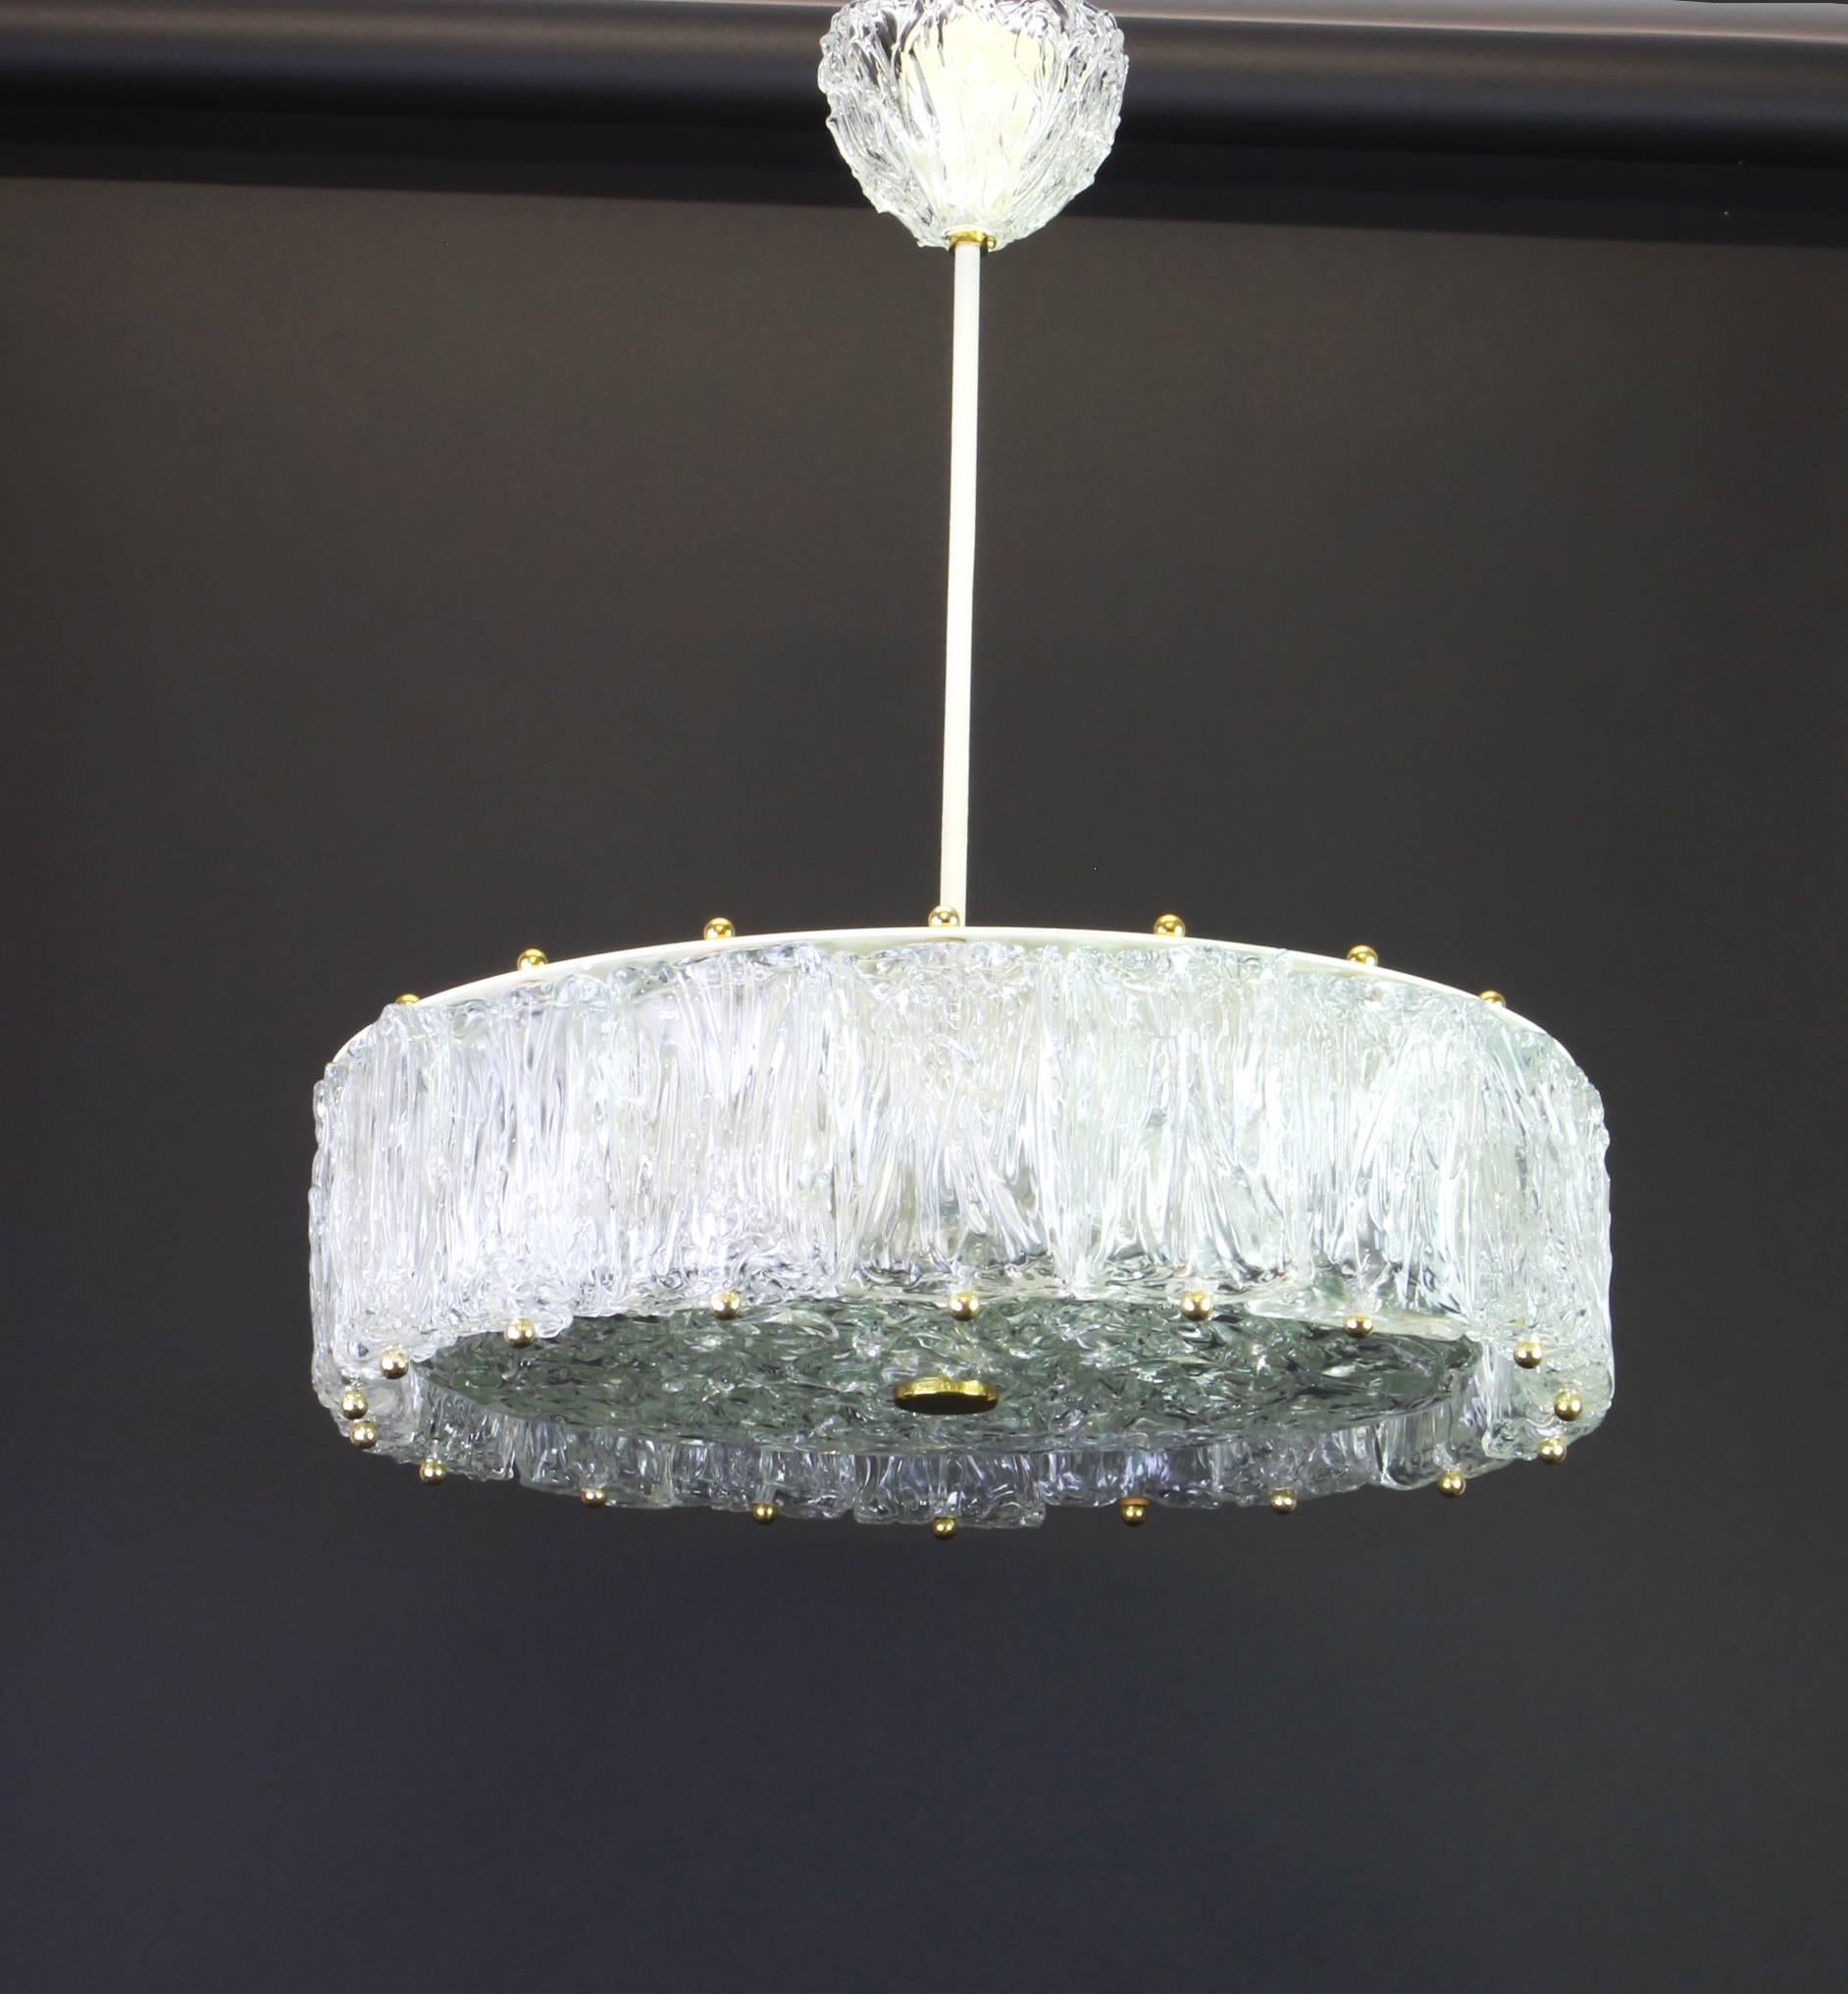 Mid Century Murano Glass Chandelier by Barovier & Toso, Italy, 1960s
Very good Condition.

High quality and in very good condition. Cleaned, well-wired and ready to use. 

The fixture requires 12 x E14 Standard bulbs with 40W max each and compatible